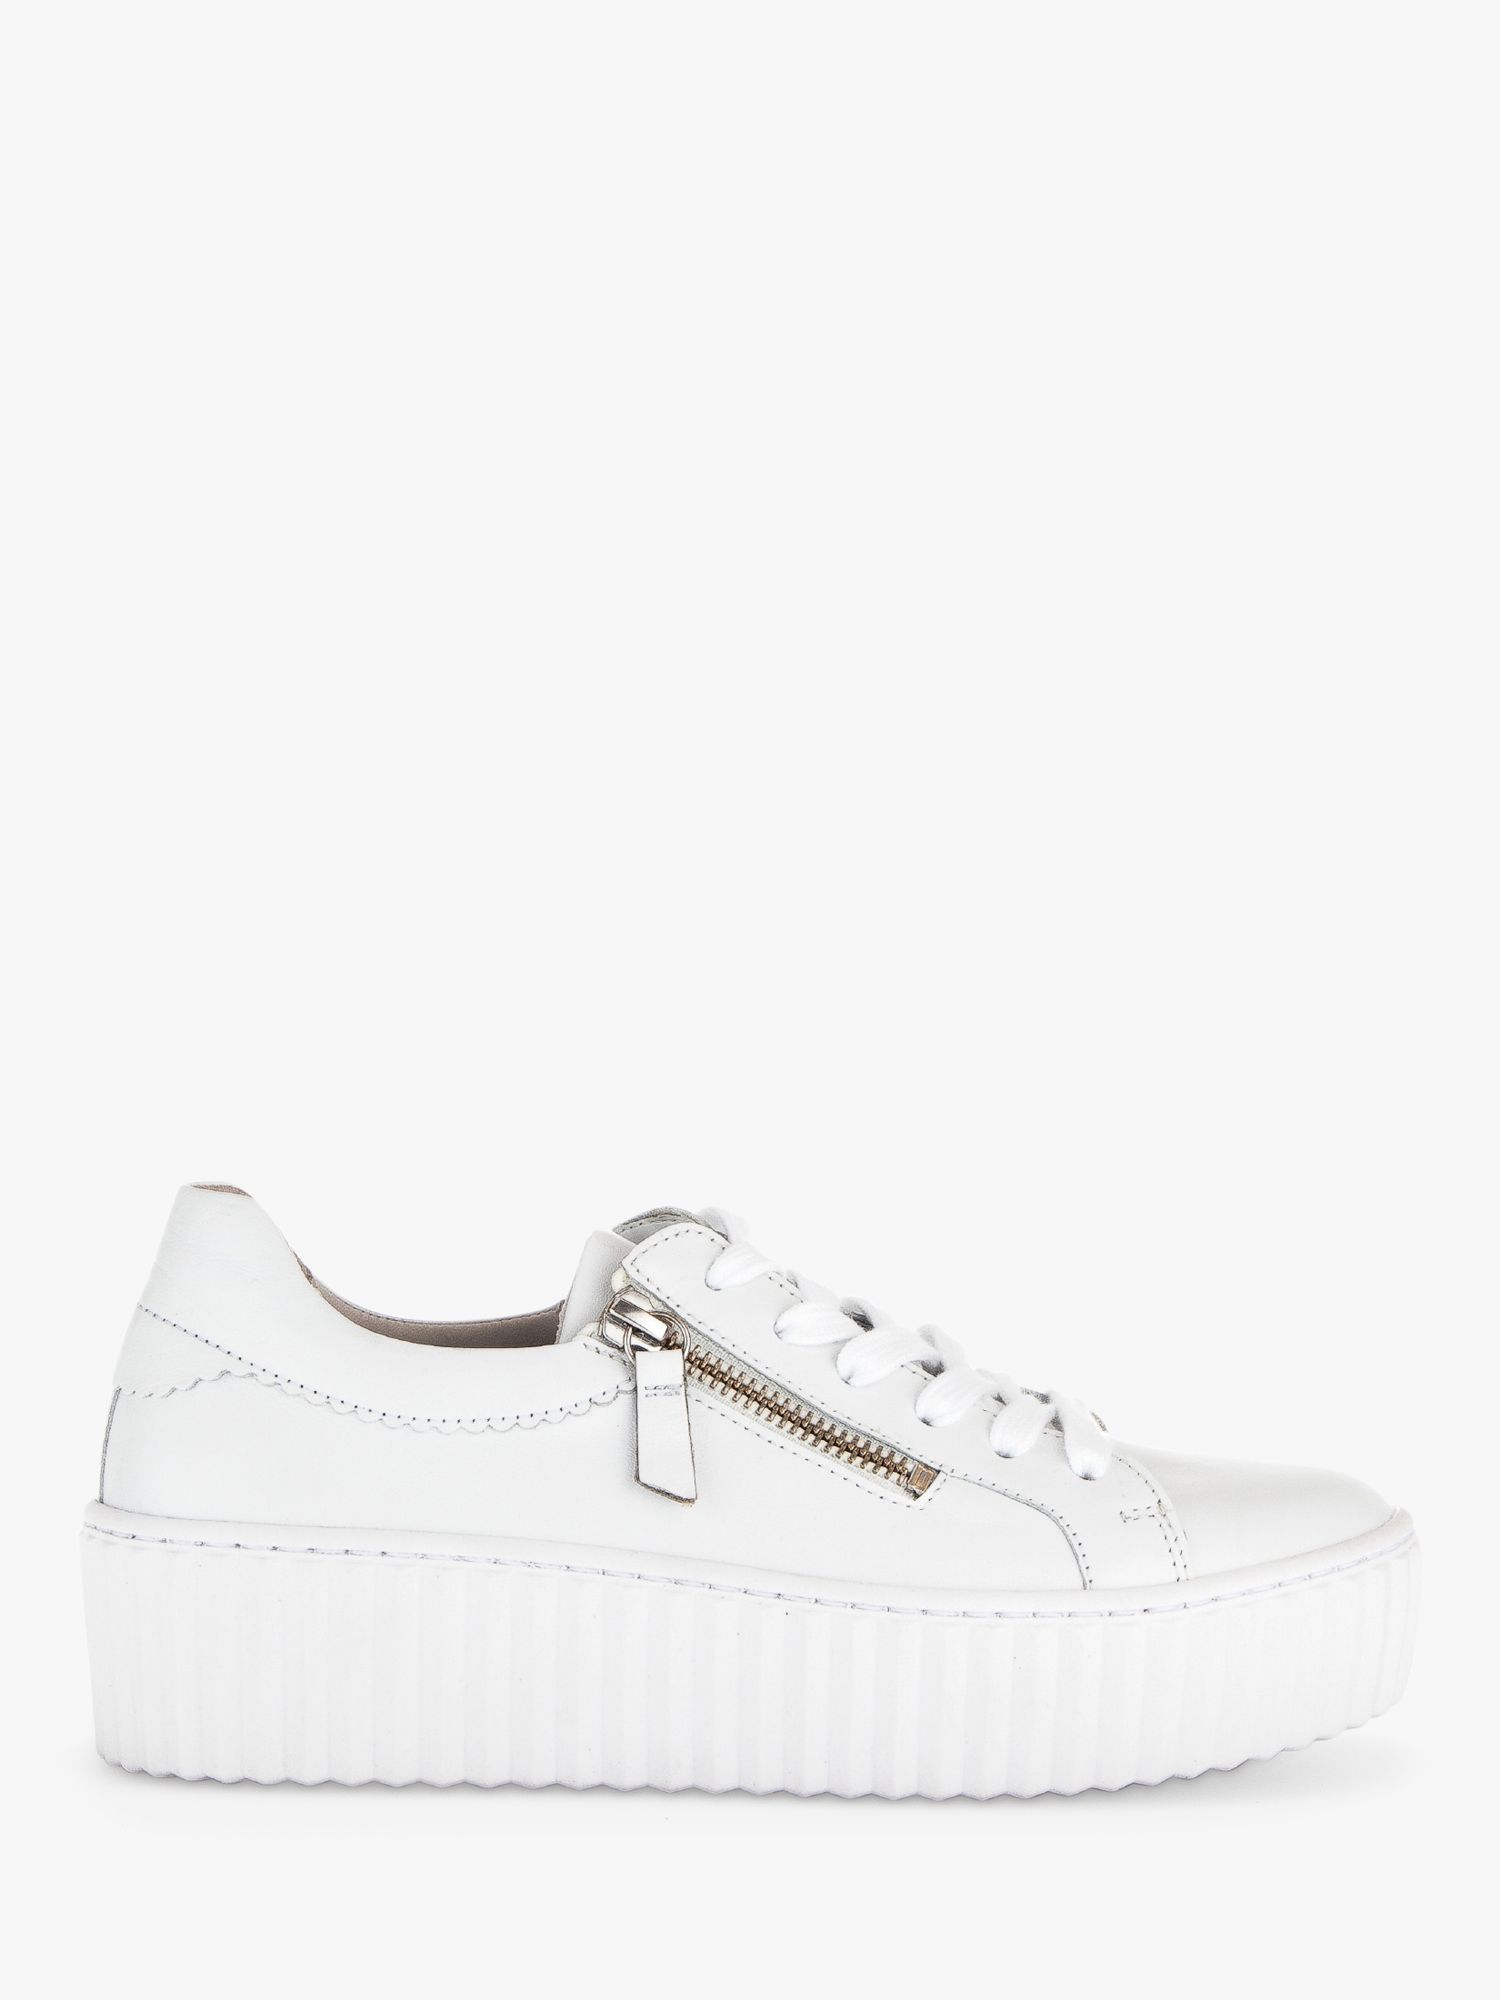 Gabor Dolly Leather Zip Detail Trainers, White at John Lewis & Partners